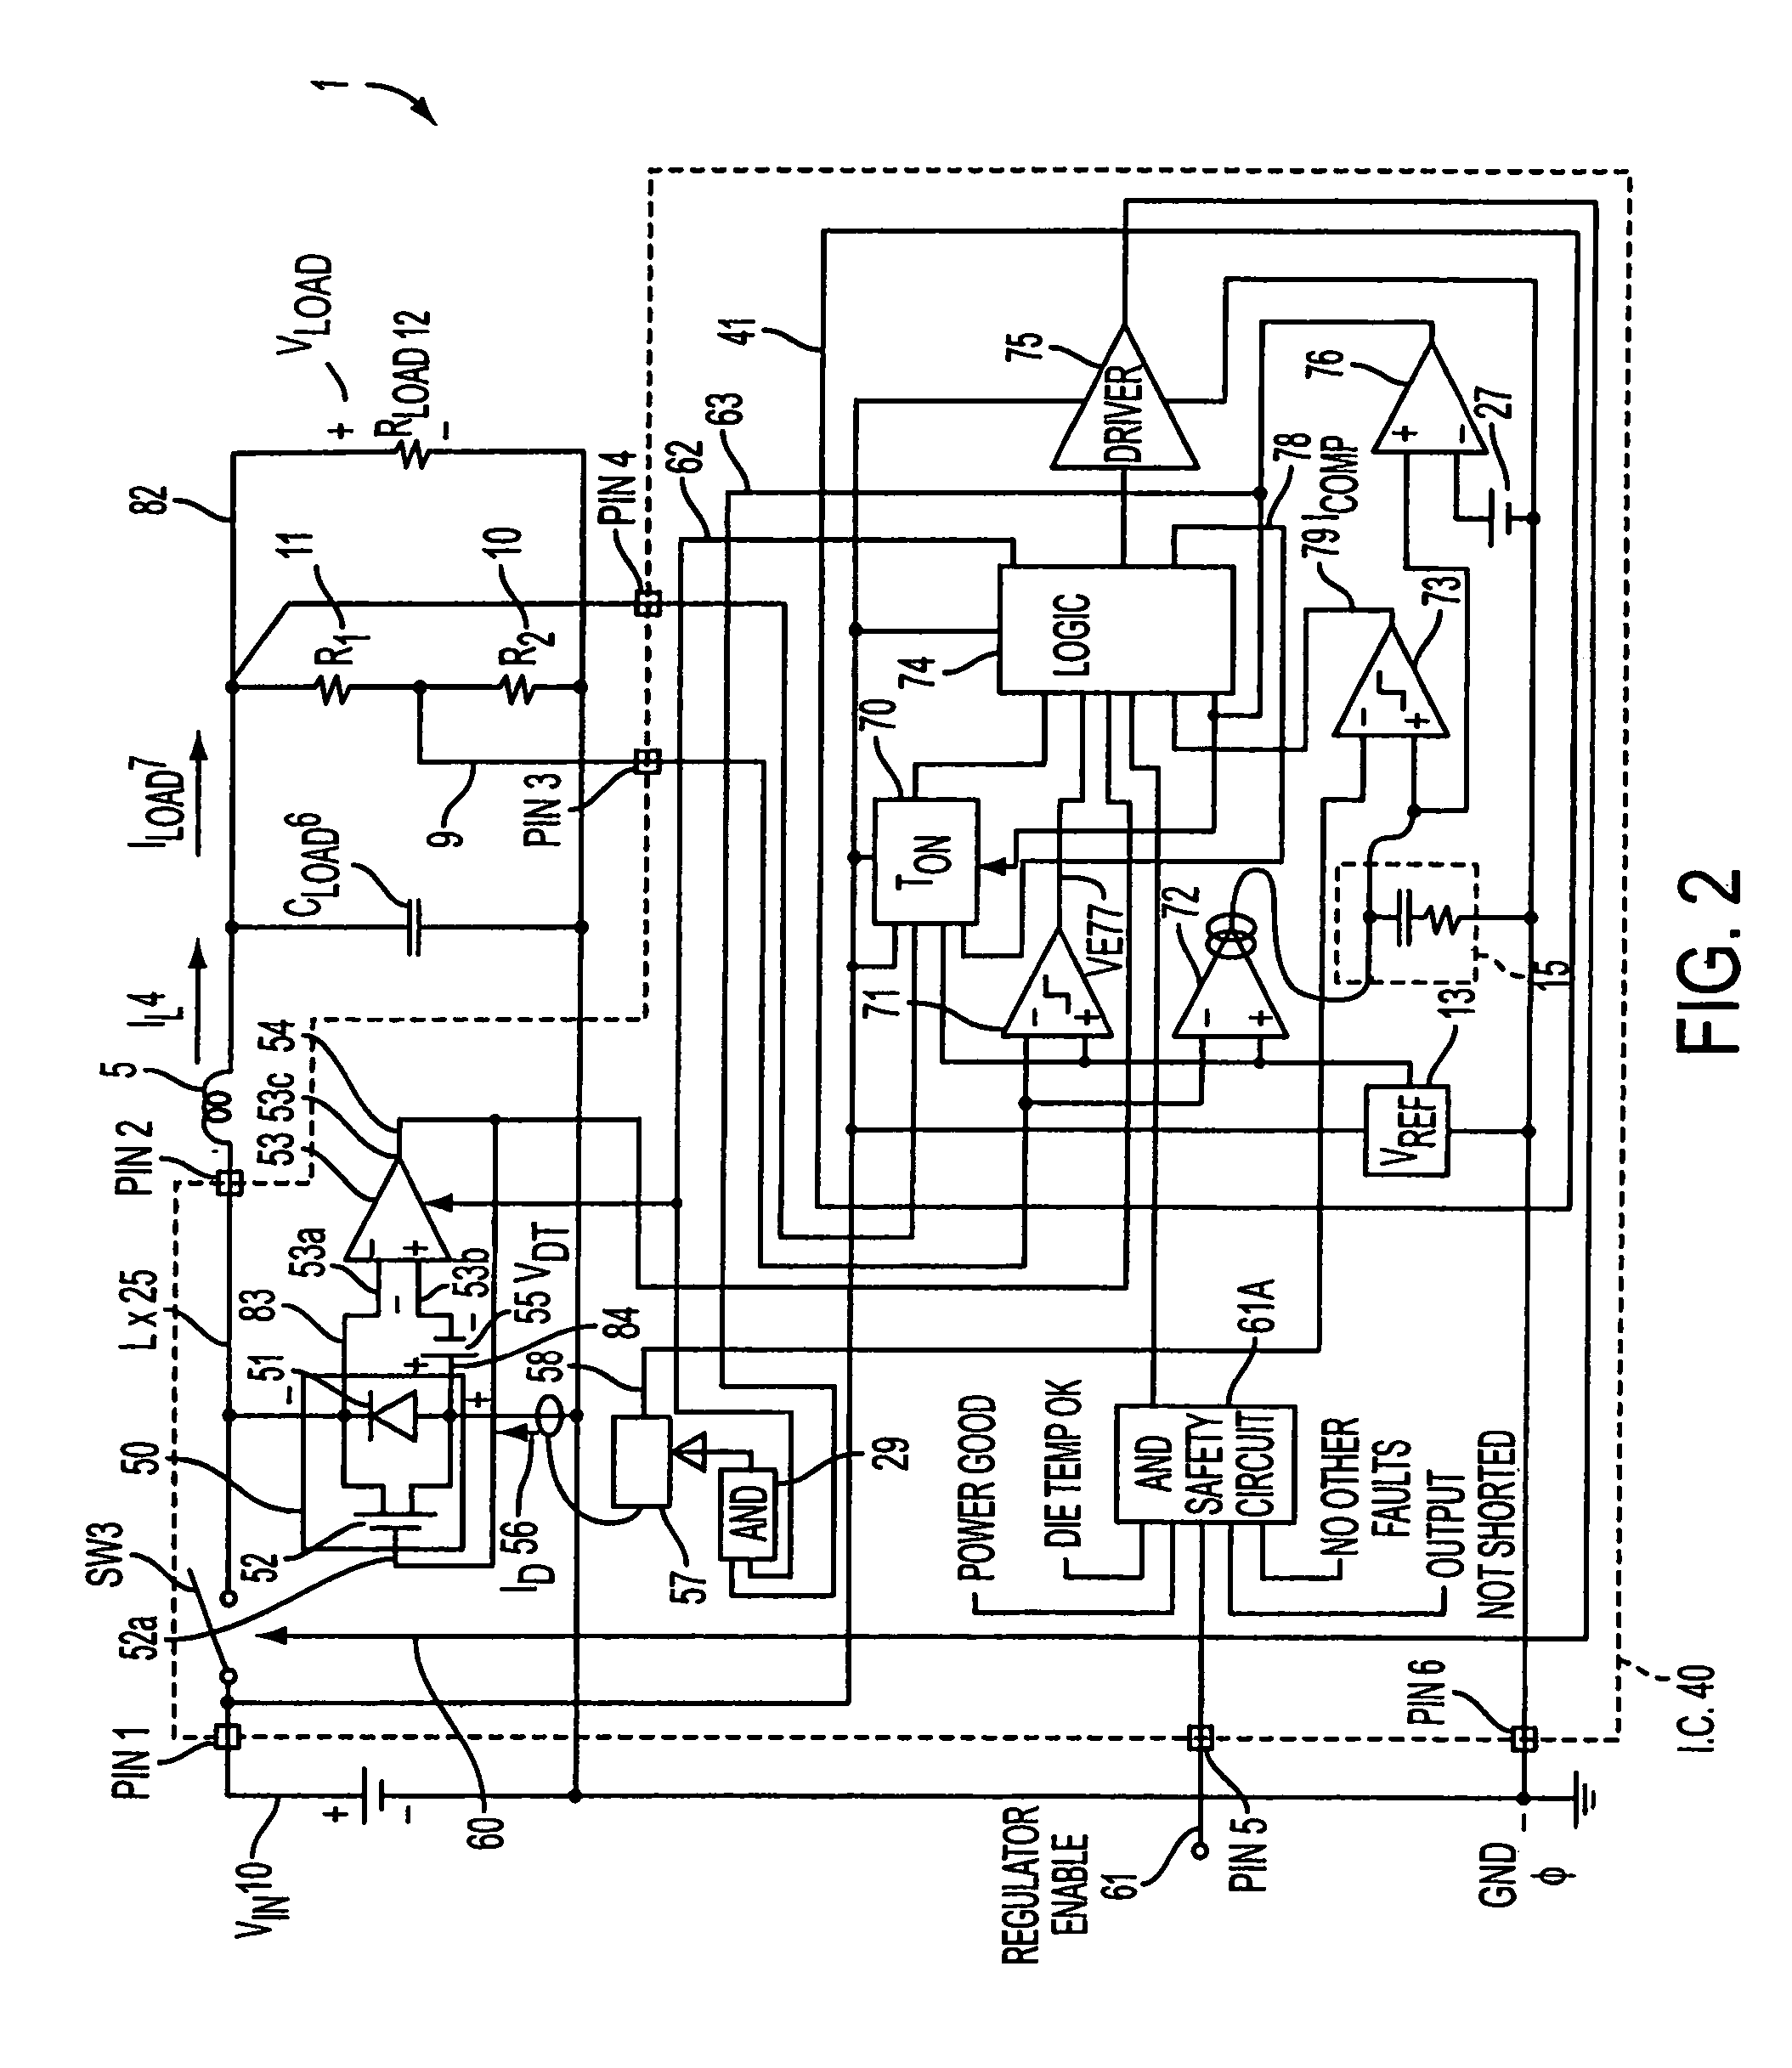 Current mode switching regulator with predetermined on time